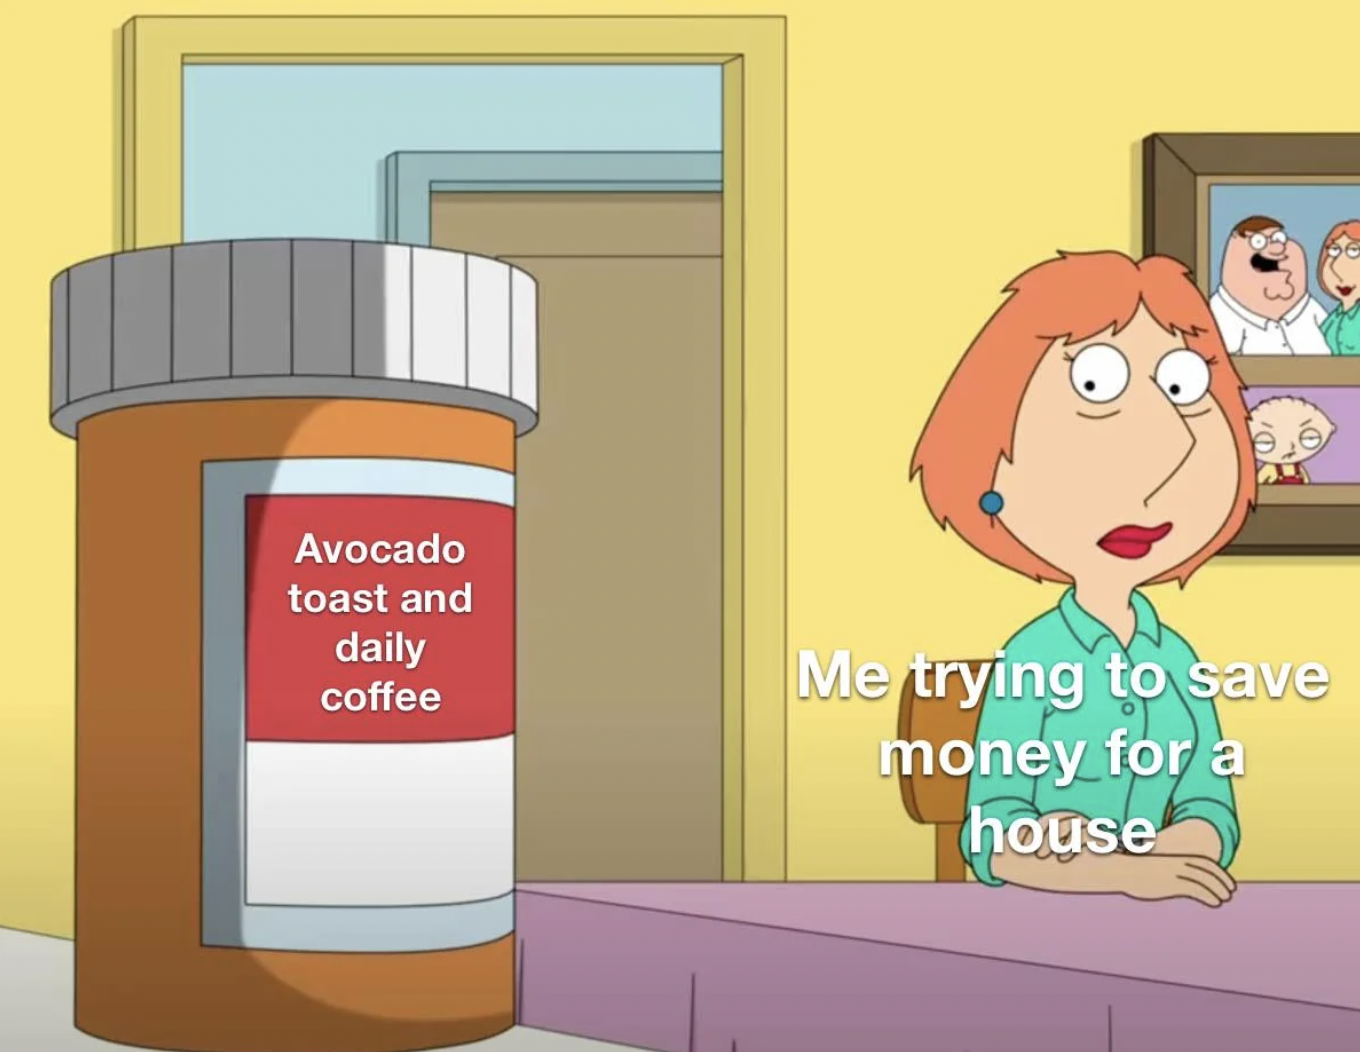 risky joke meme - Avocado toast and daily coffee Me trying to save money for a house